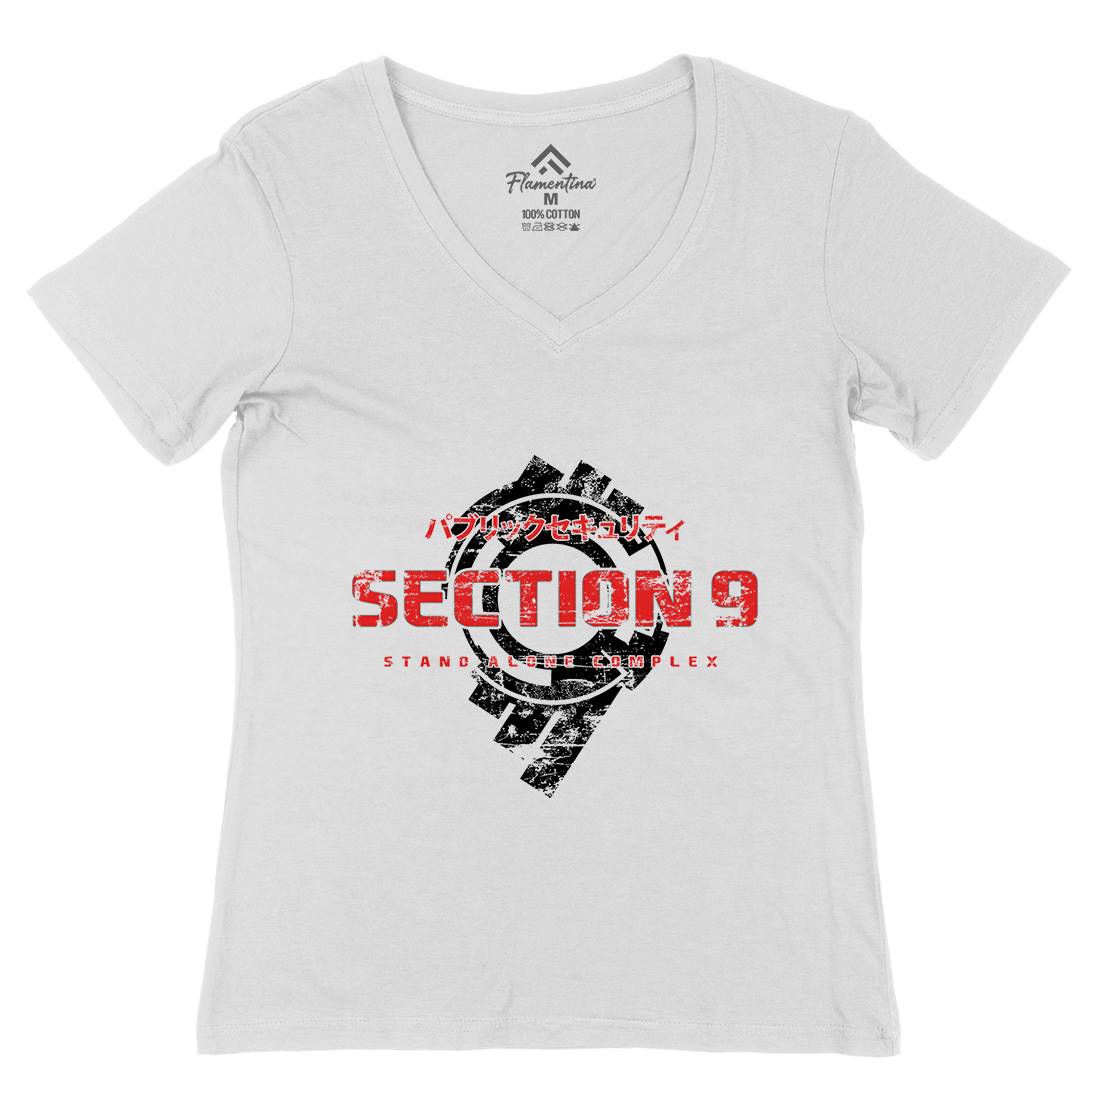 Section 9 Womens Organic V-Neck T-Shirt Space D193